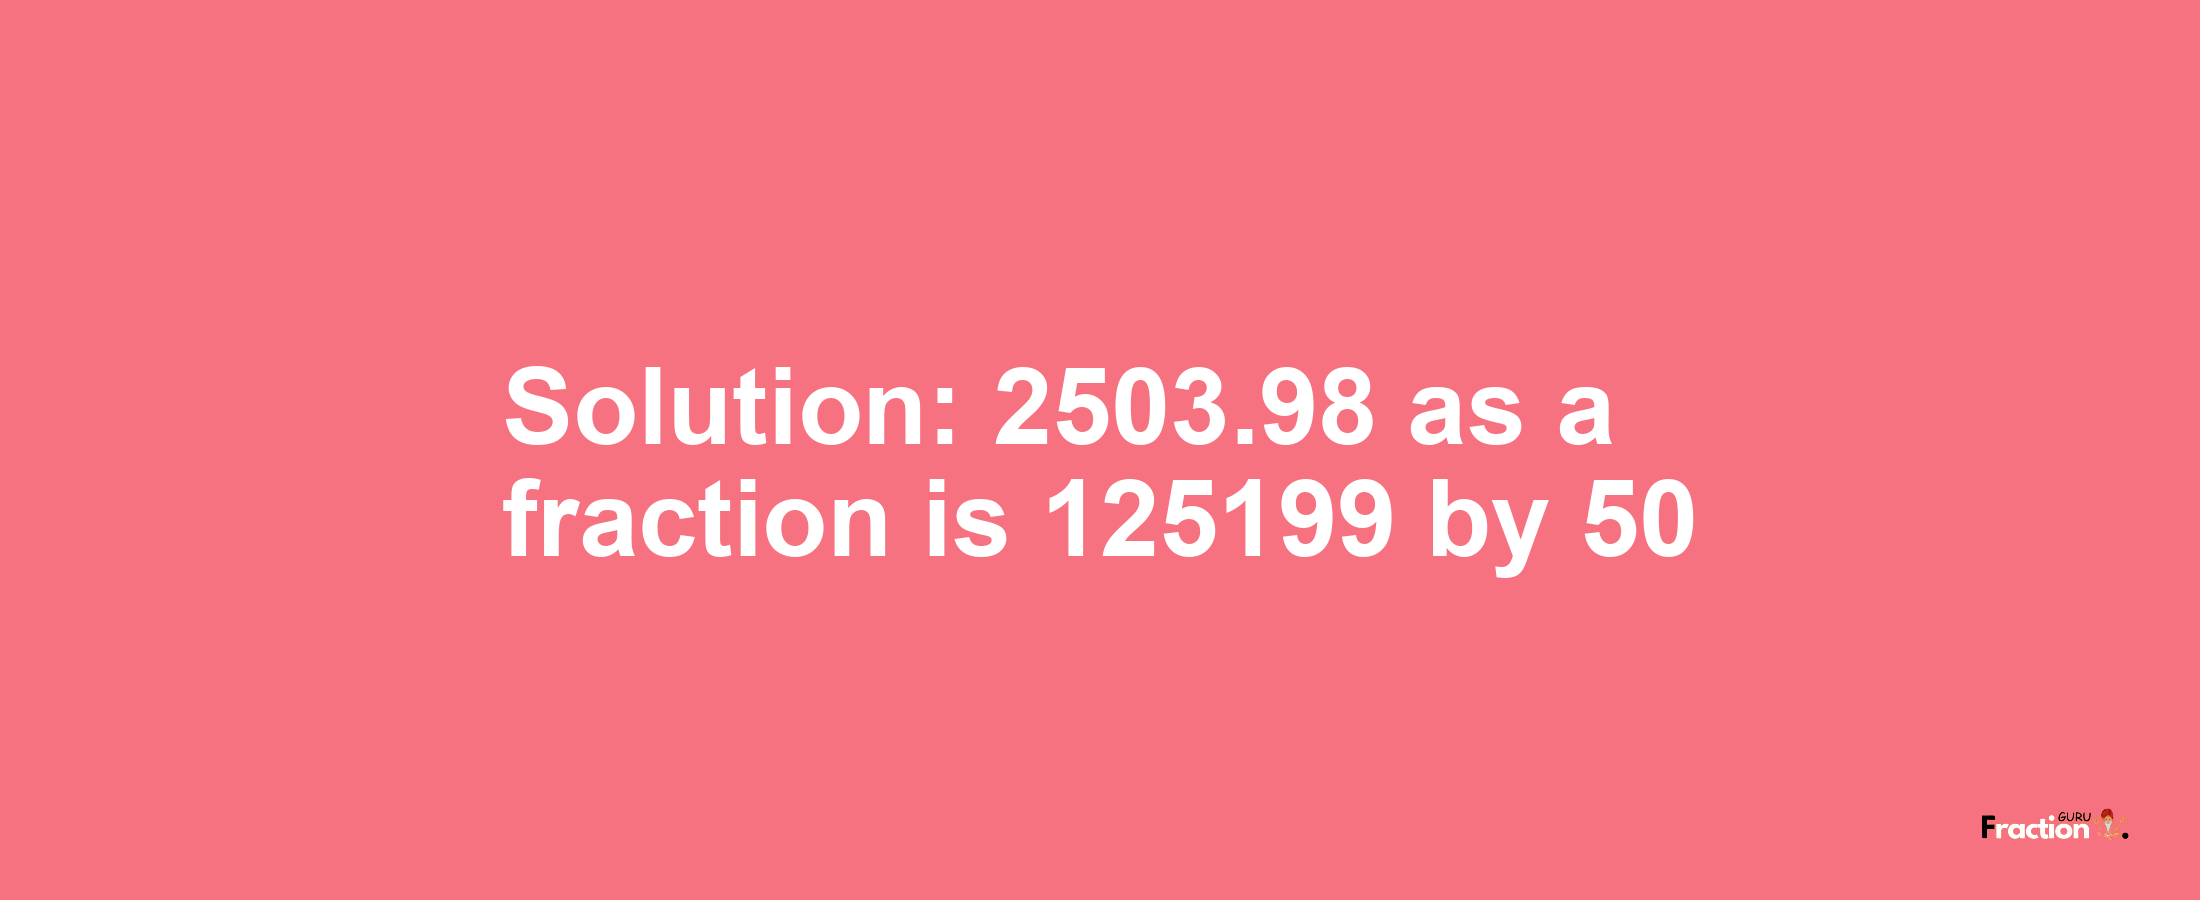 Solution:2503.98 as a fraction is 125199/50